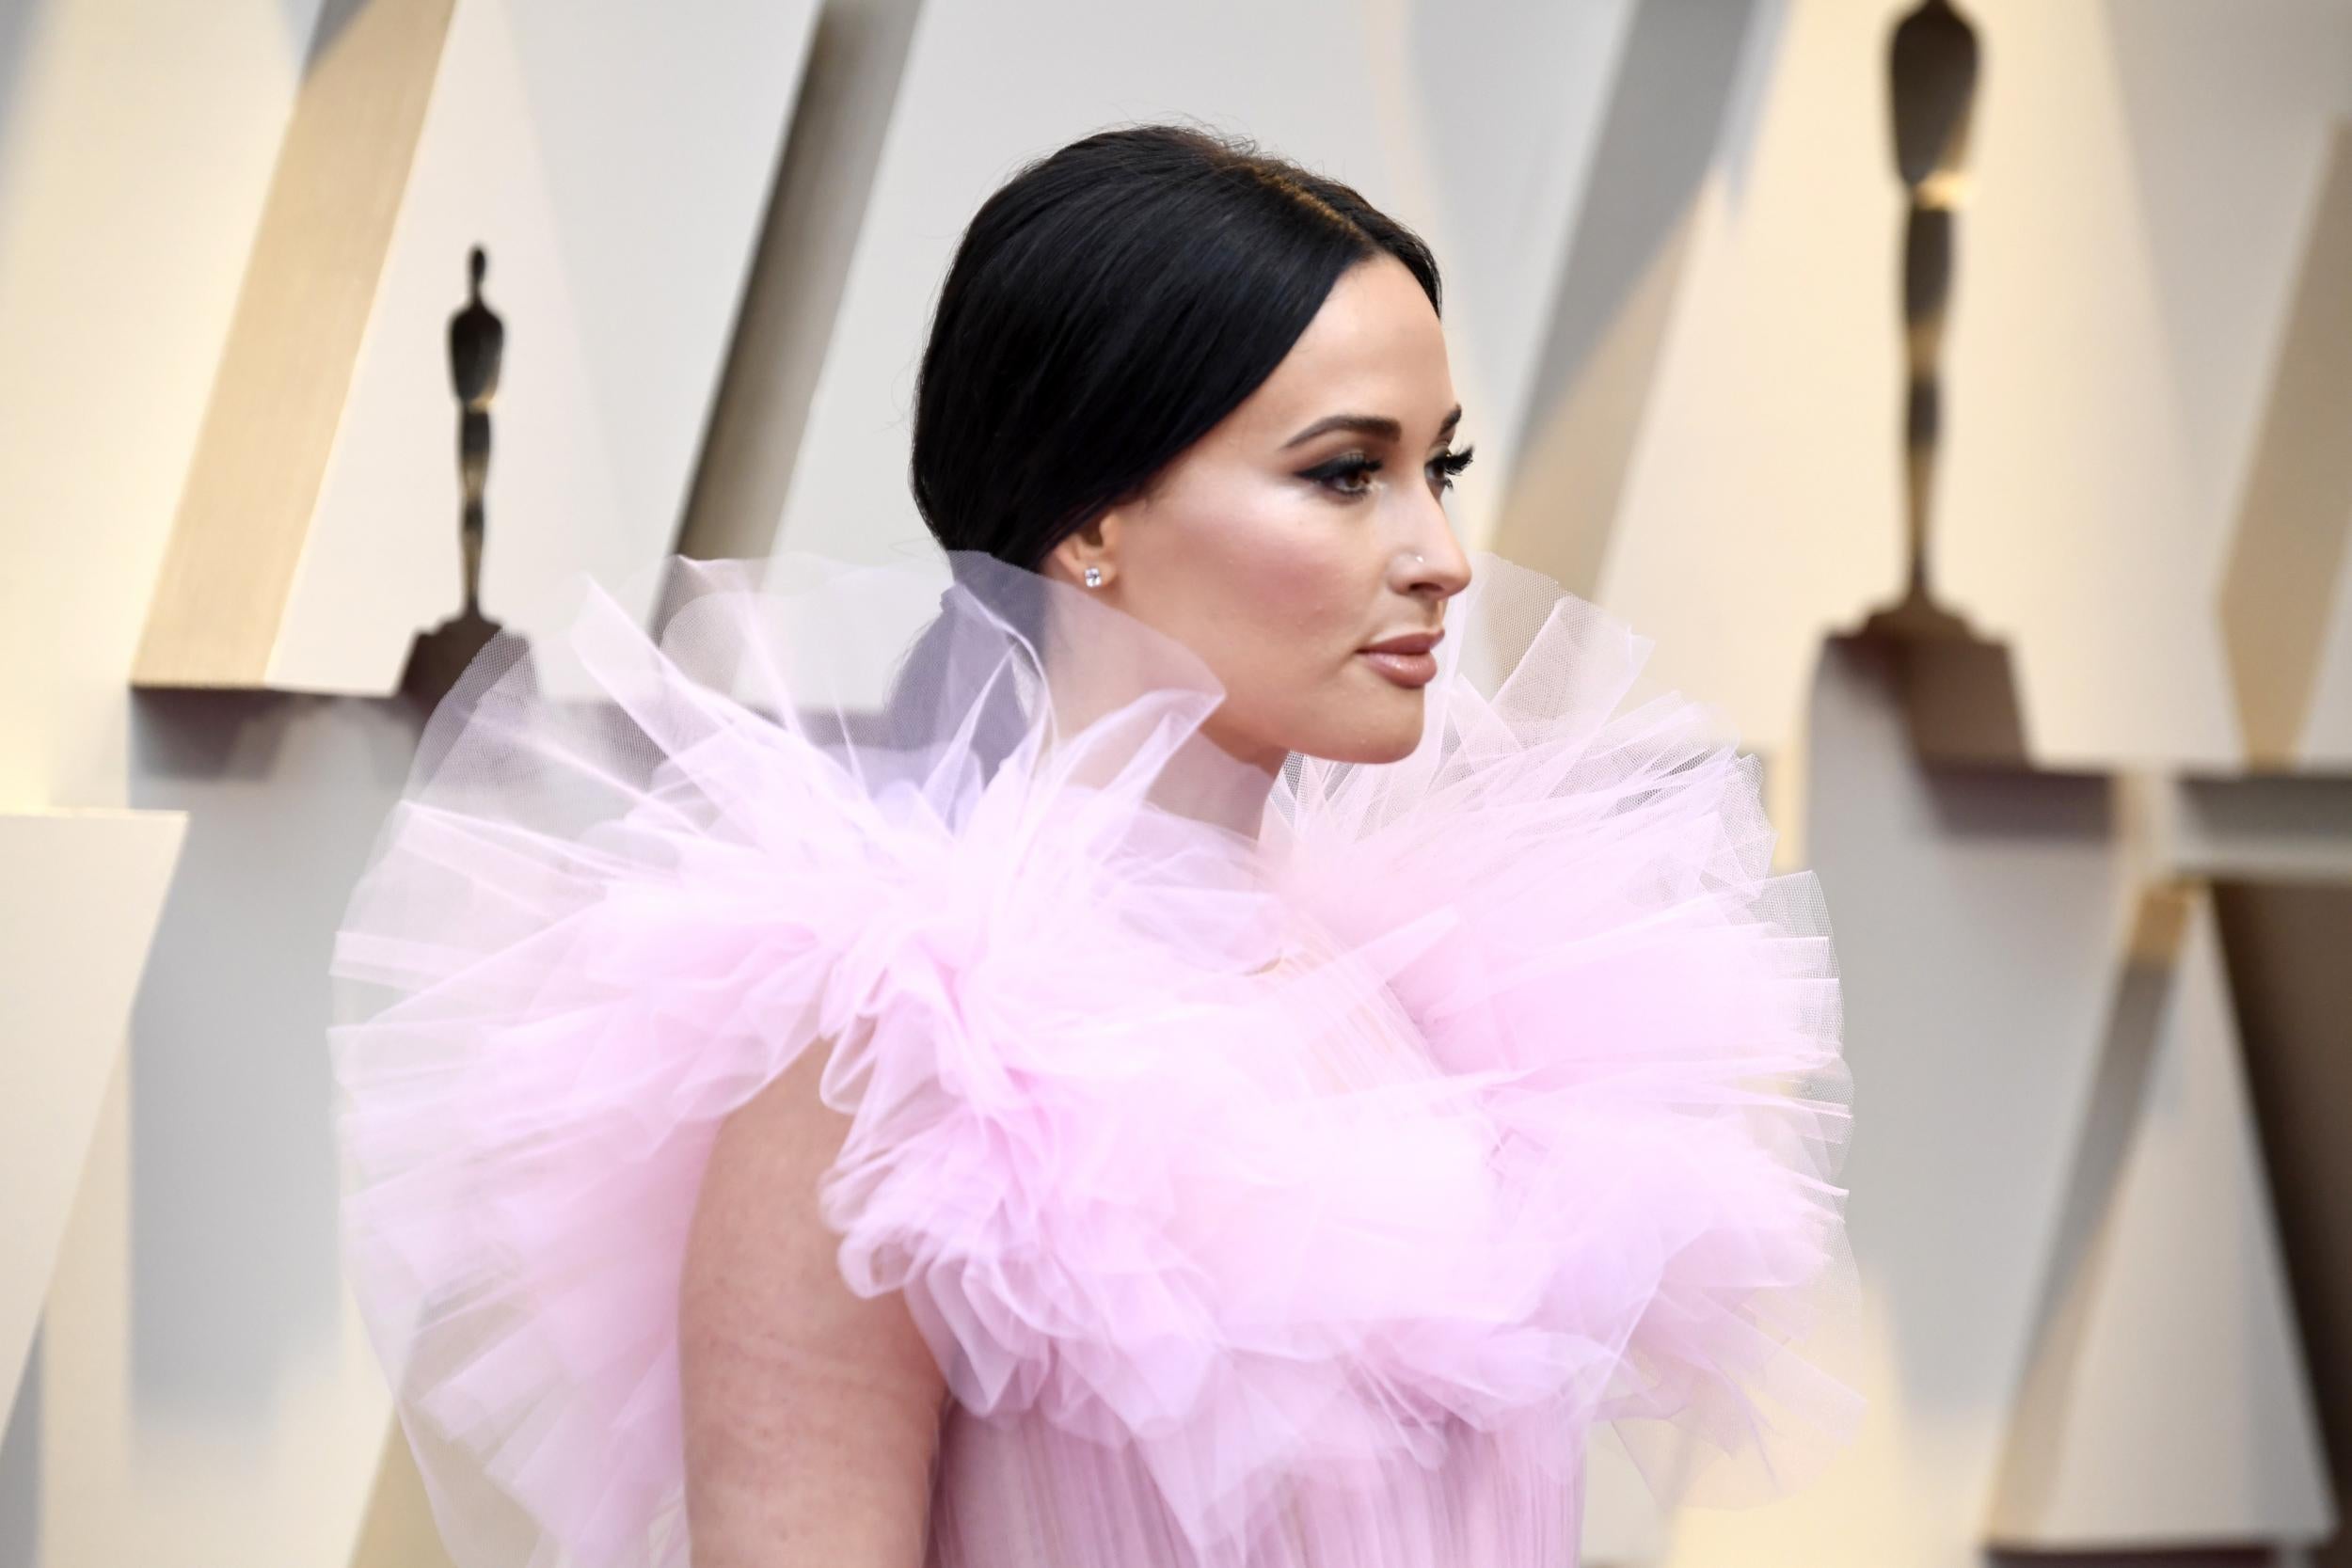 Kacey Musgraves arrives at the 2019 Oscars.